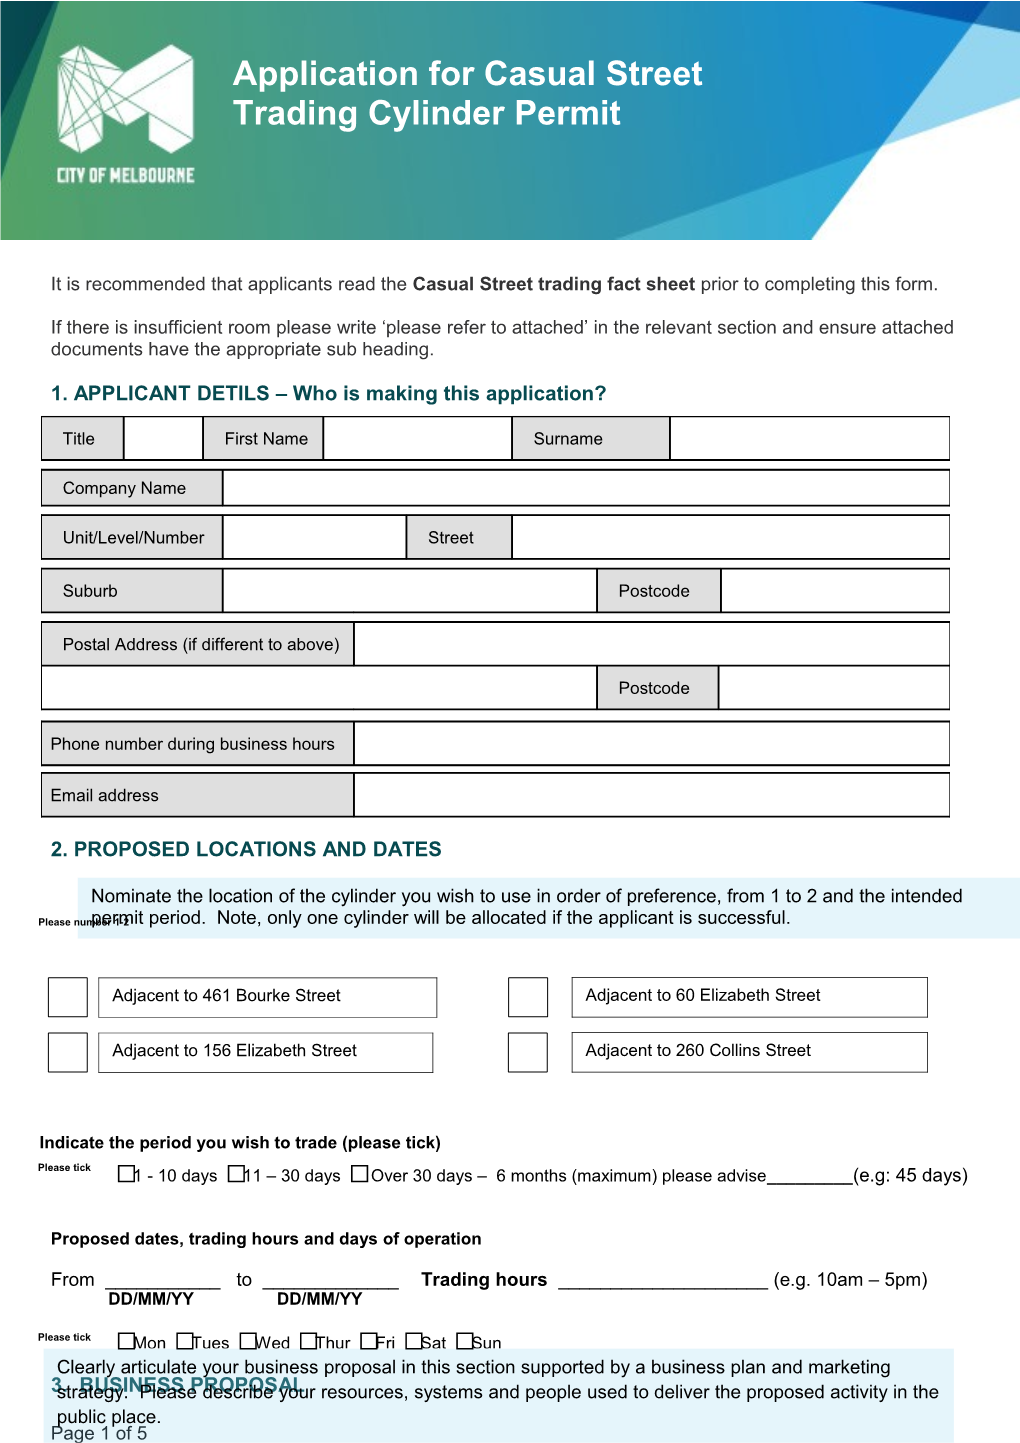 Casual Cylinder Application Form